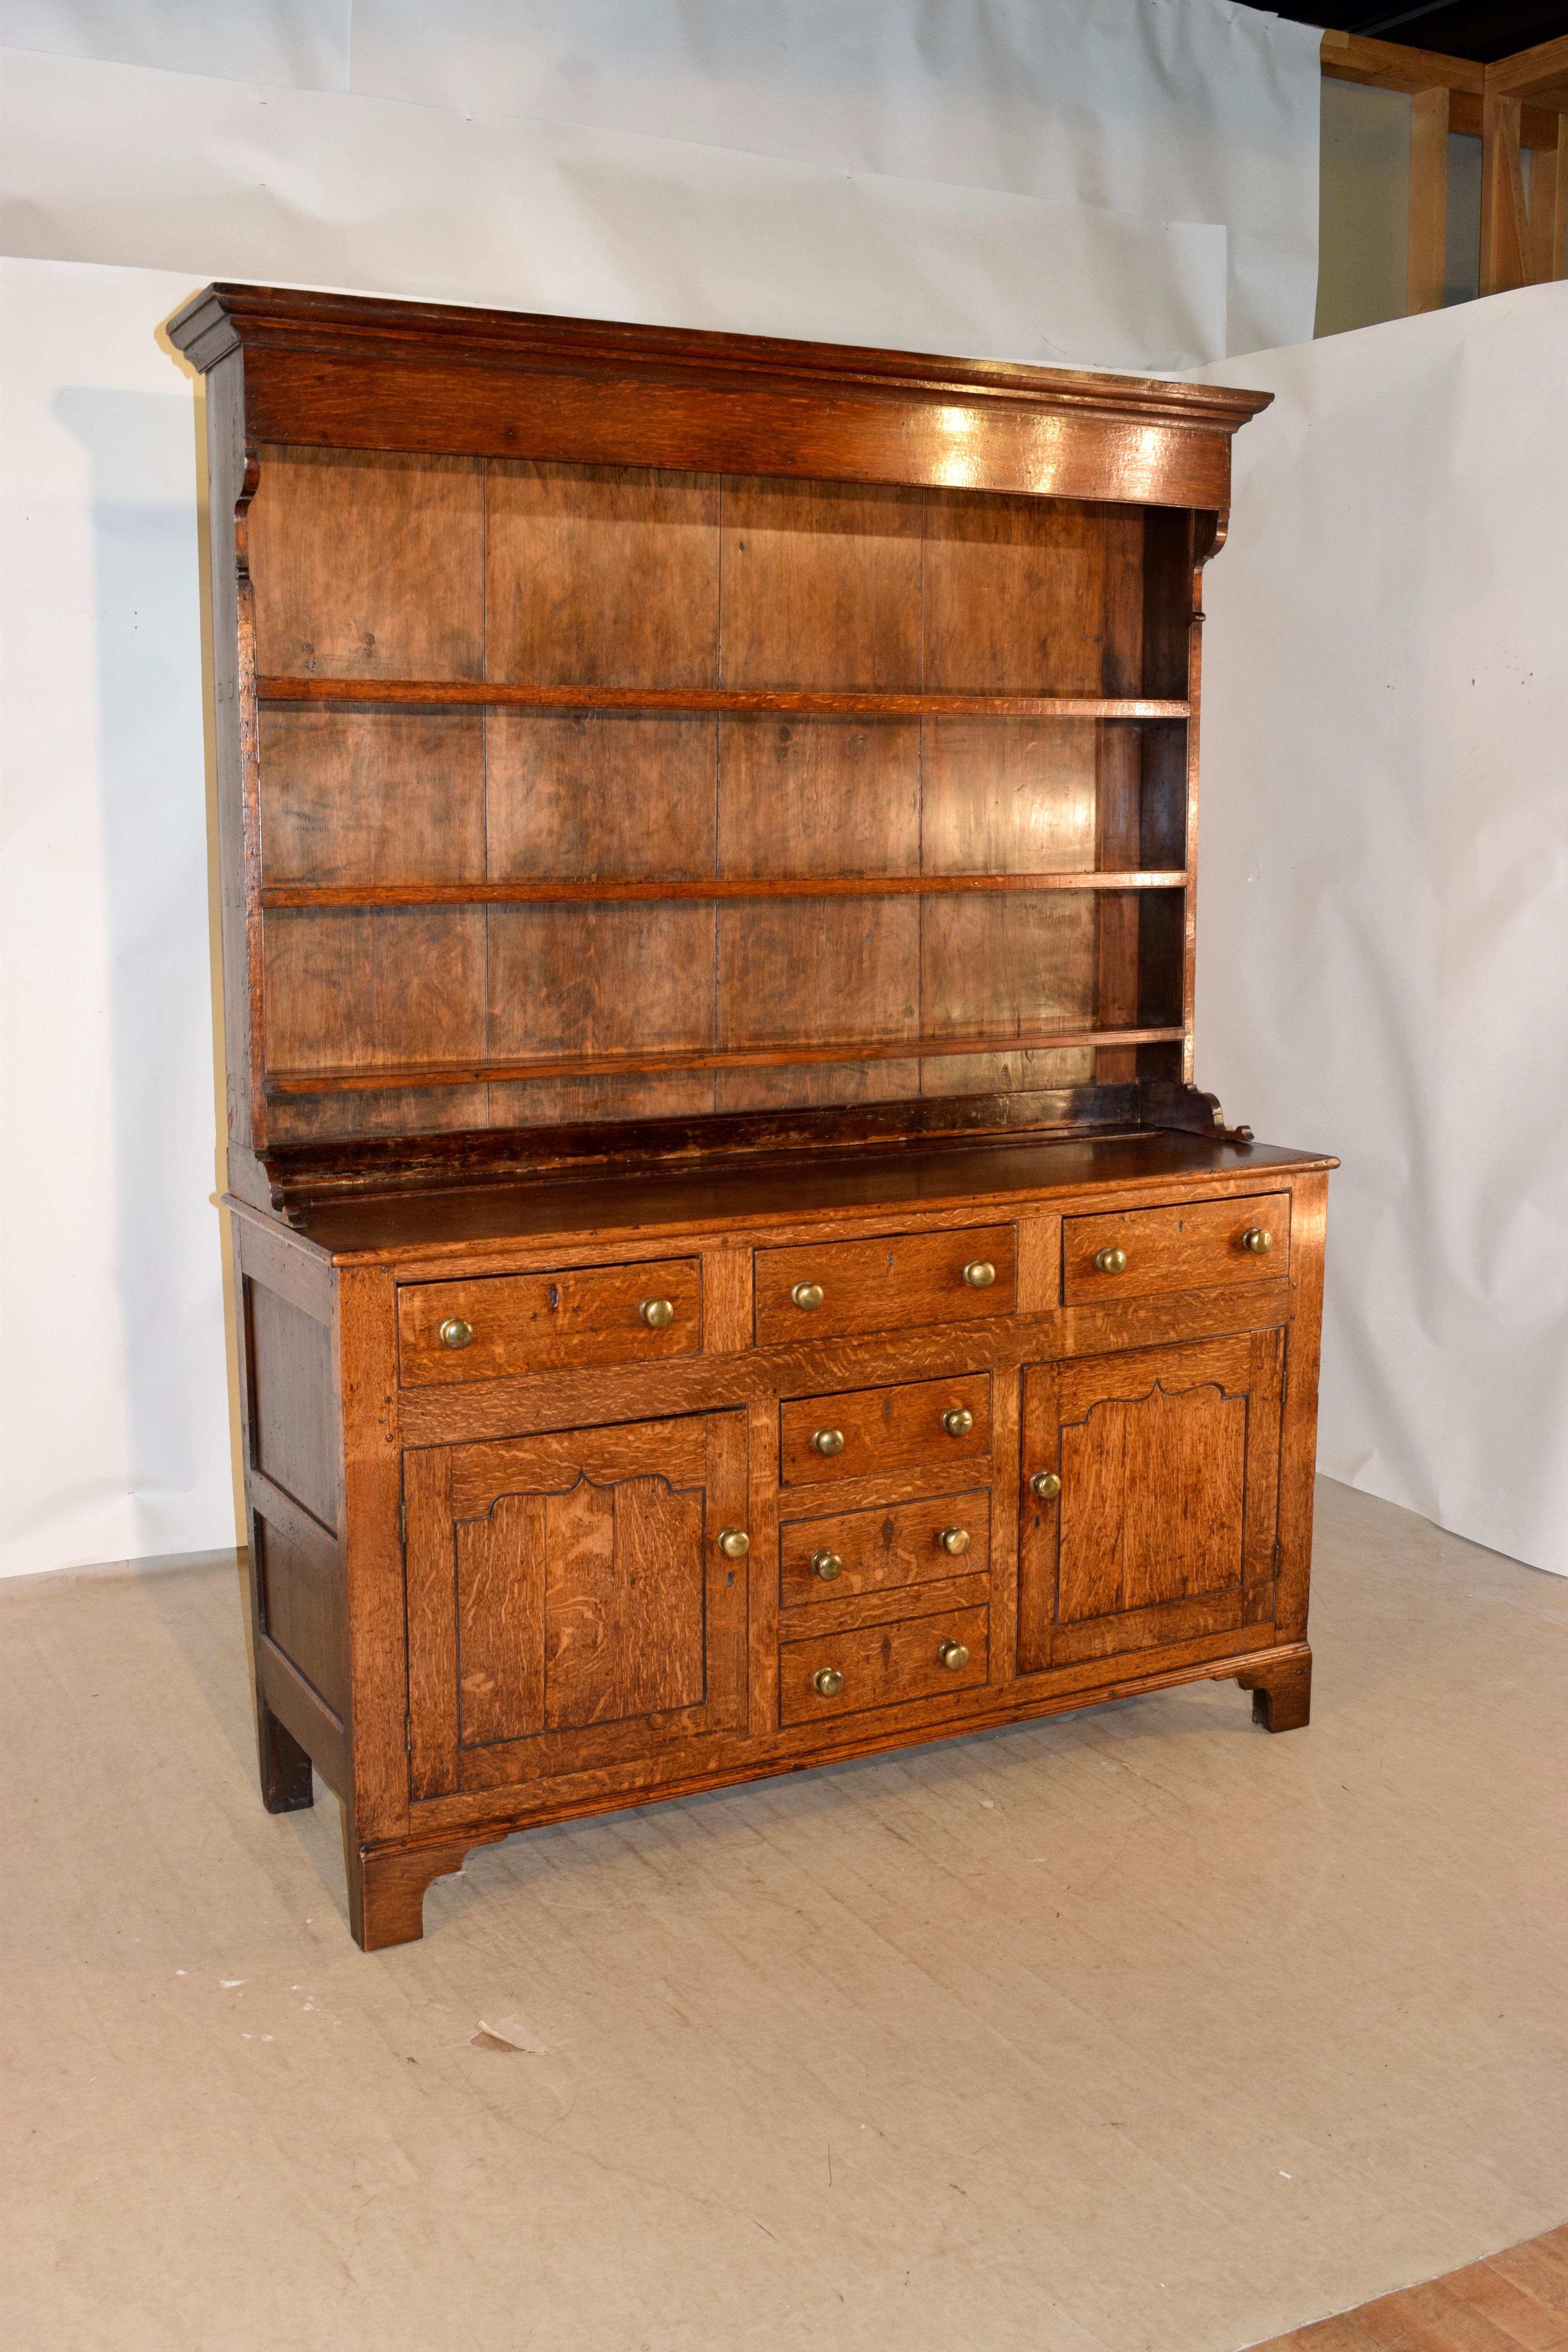 welsh dressers for sale near me